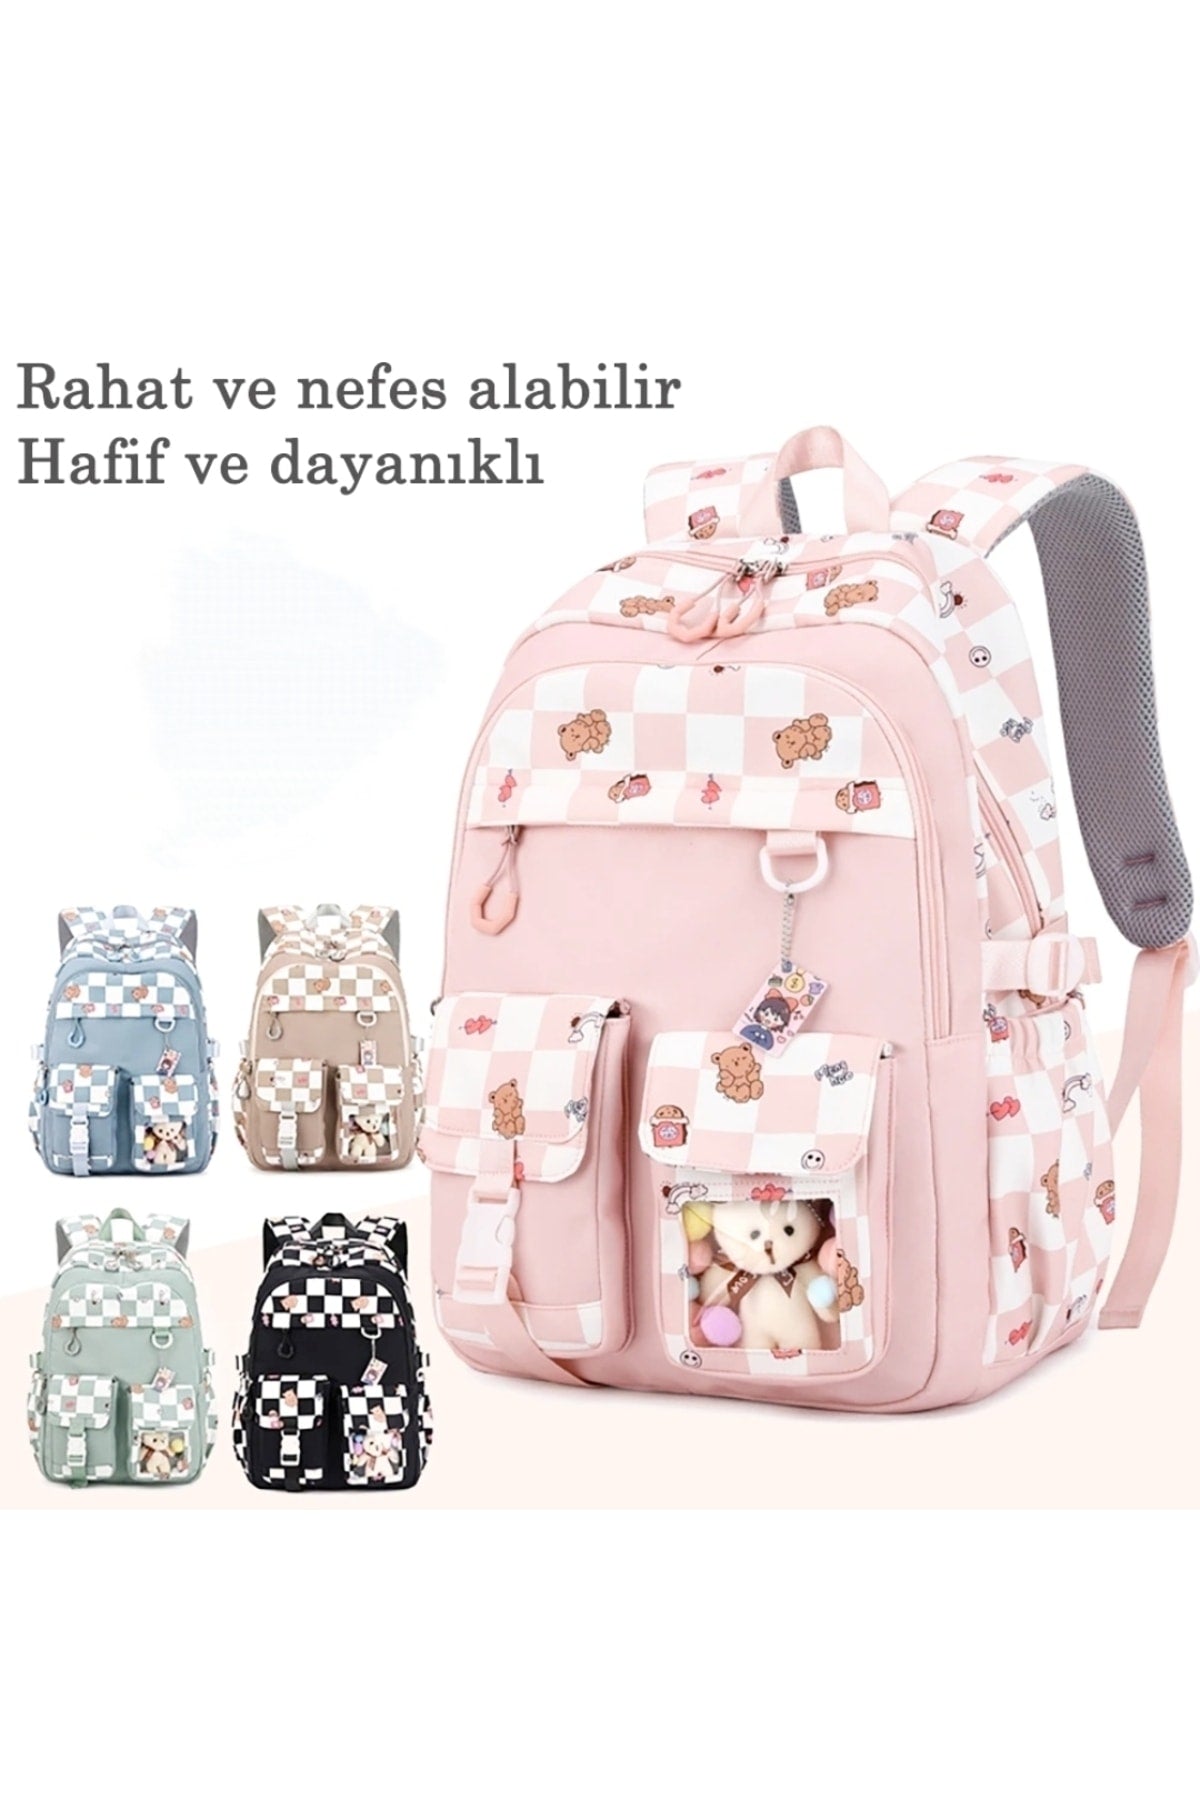 Checked Patterned School Bag With Accessories